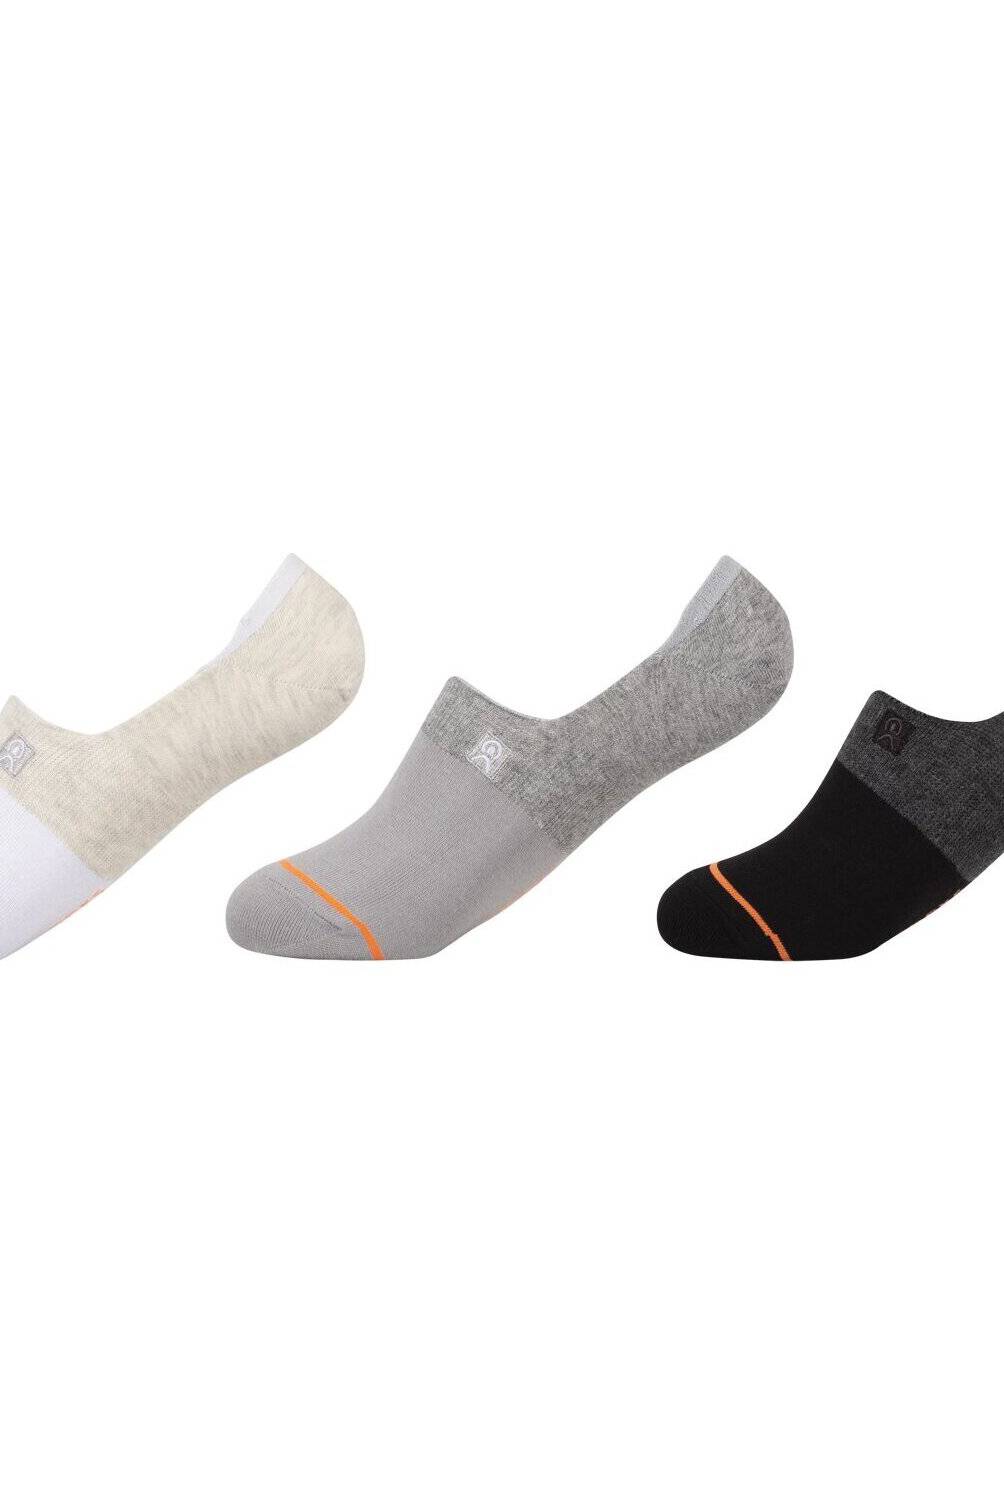 ENERSOCKS - Pack 3 Calcetines Invisible @